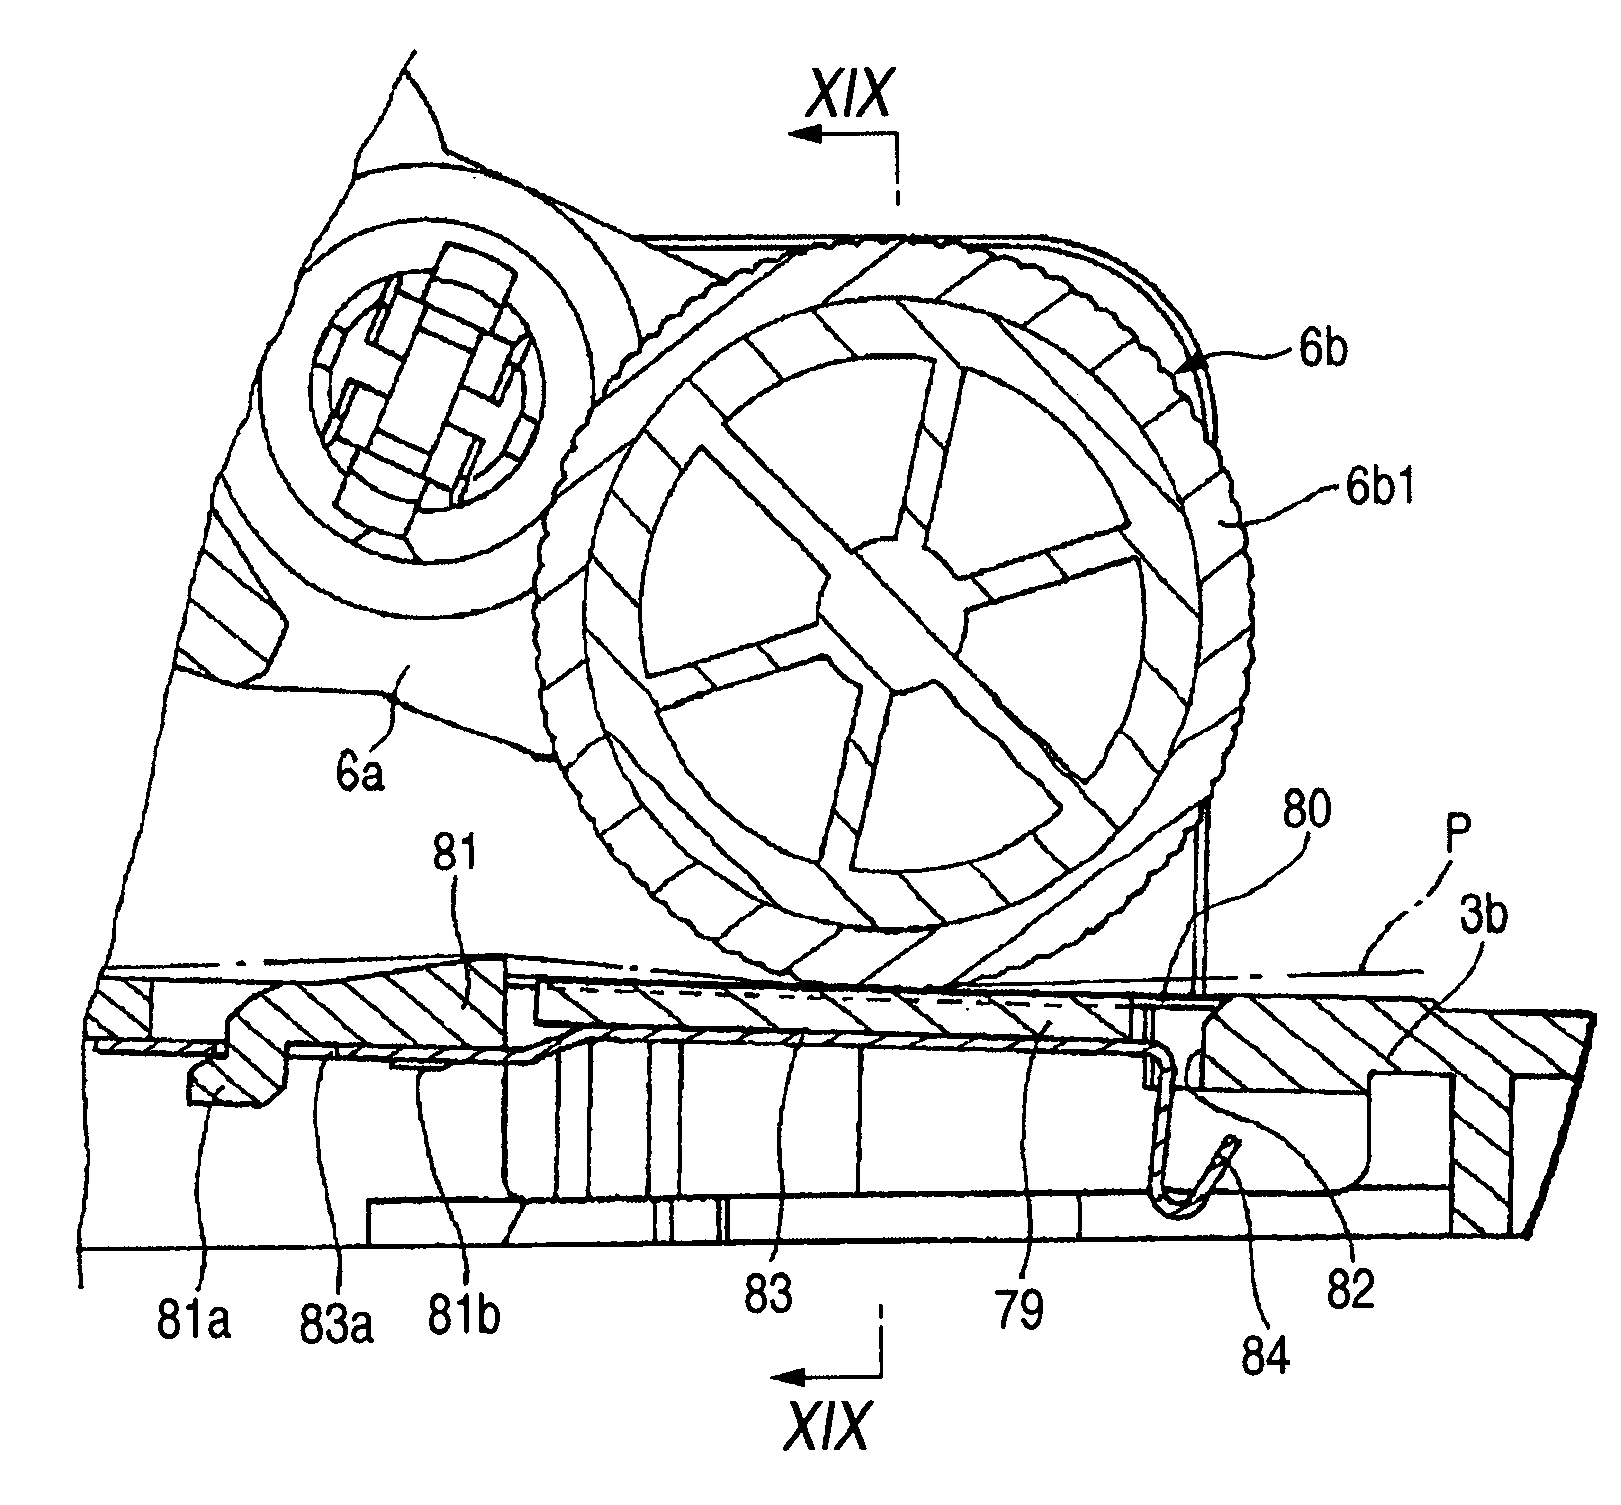 Recording medium feeder with multiple frictional surfaces and image recording device